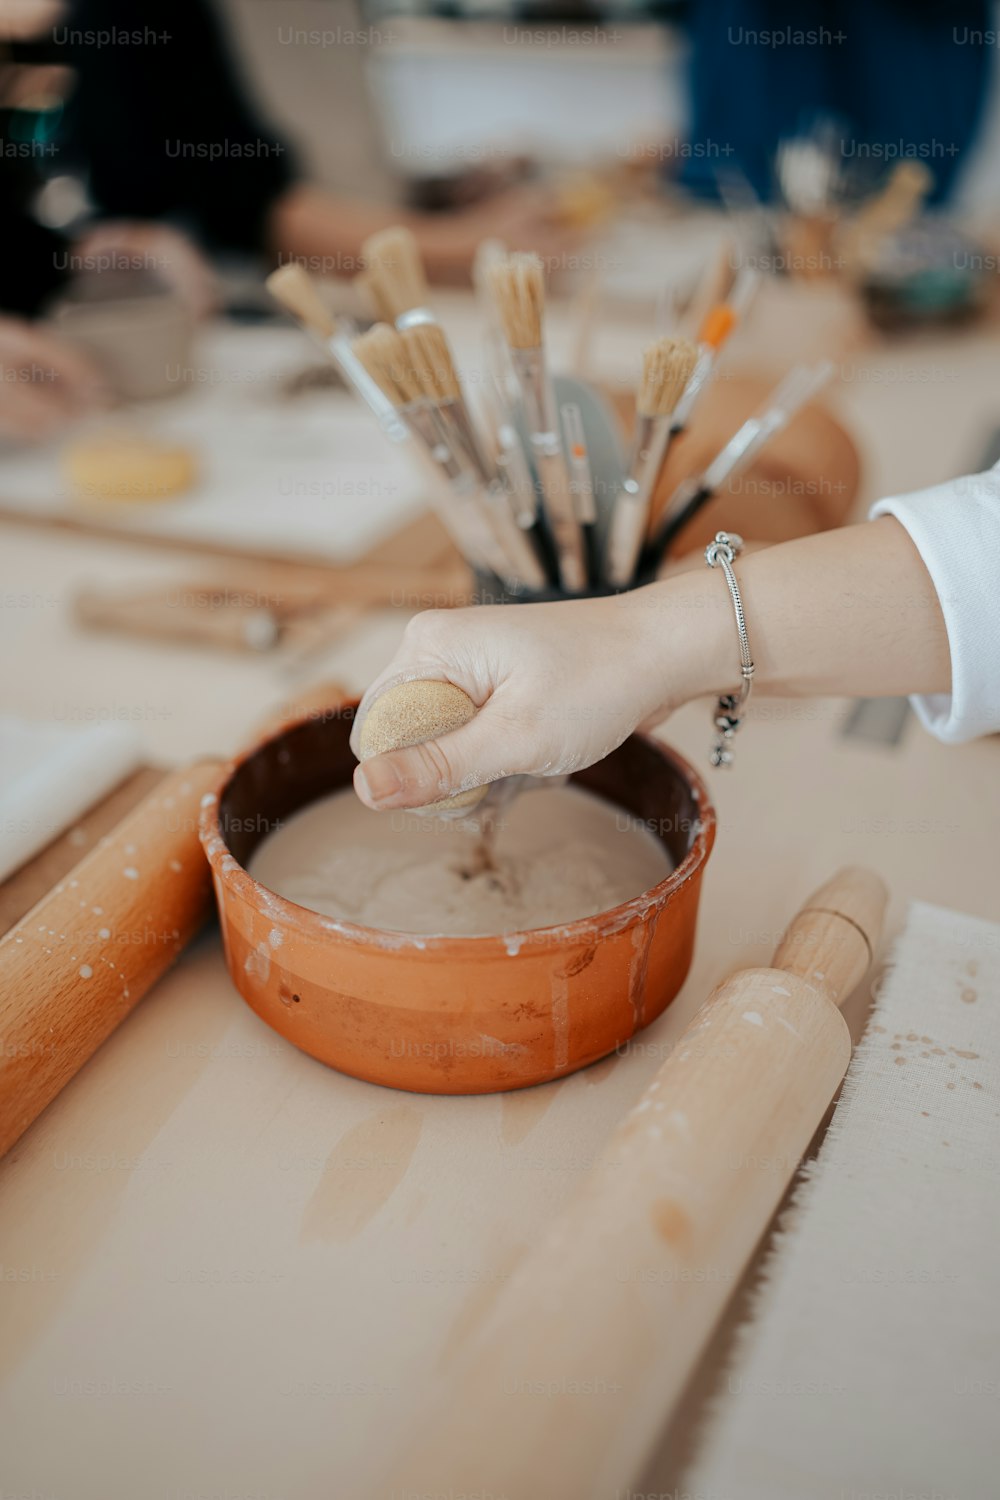 a person is painting a bowl with paintbrushes